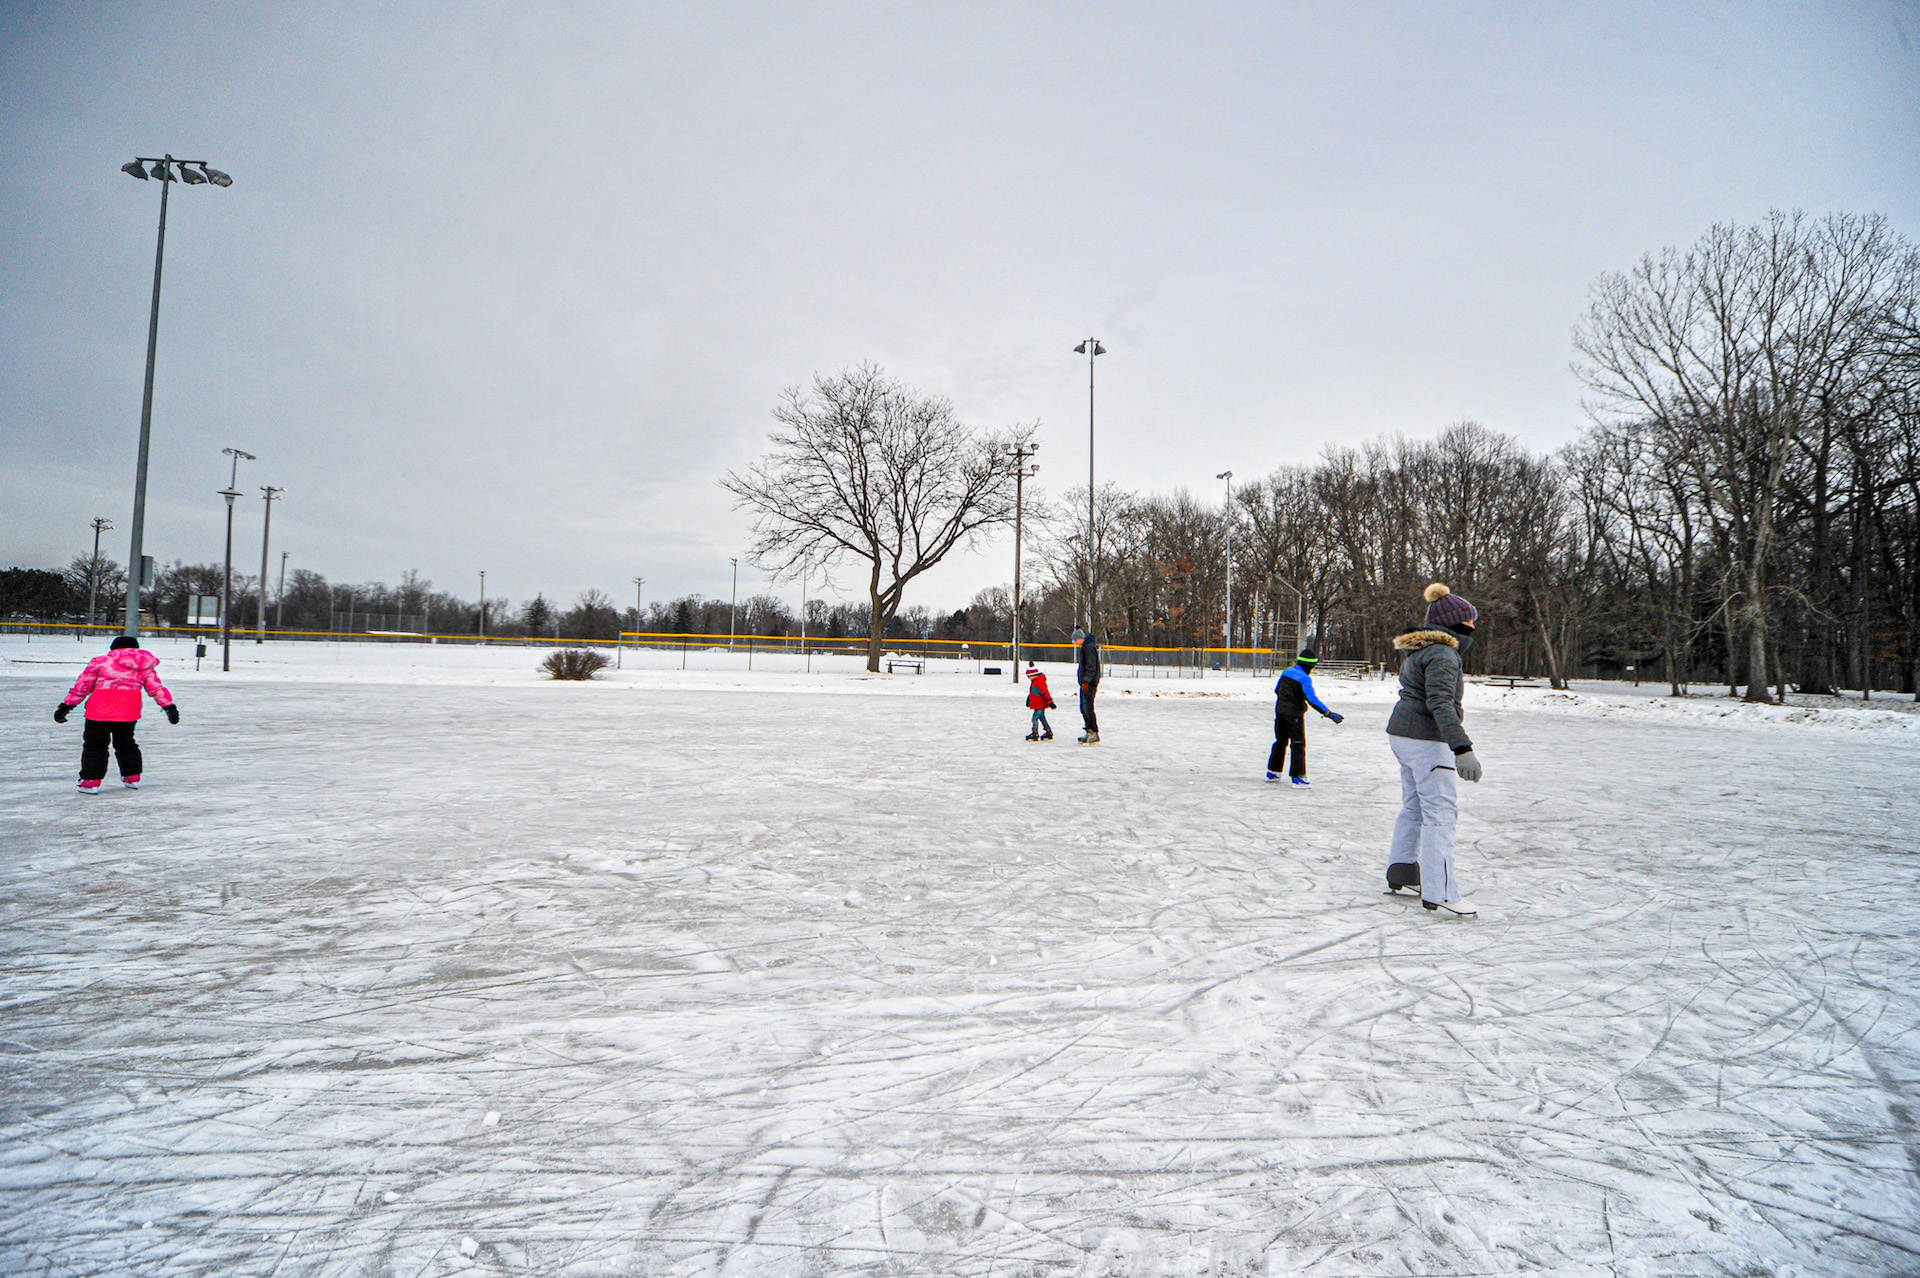 Area rinks open for skating